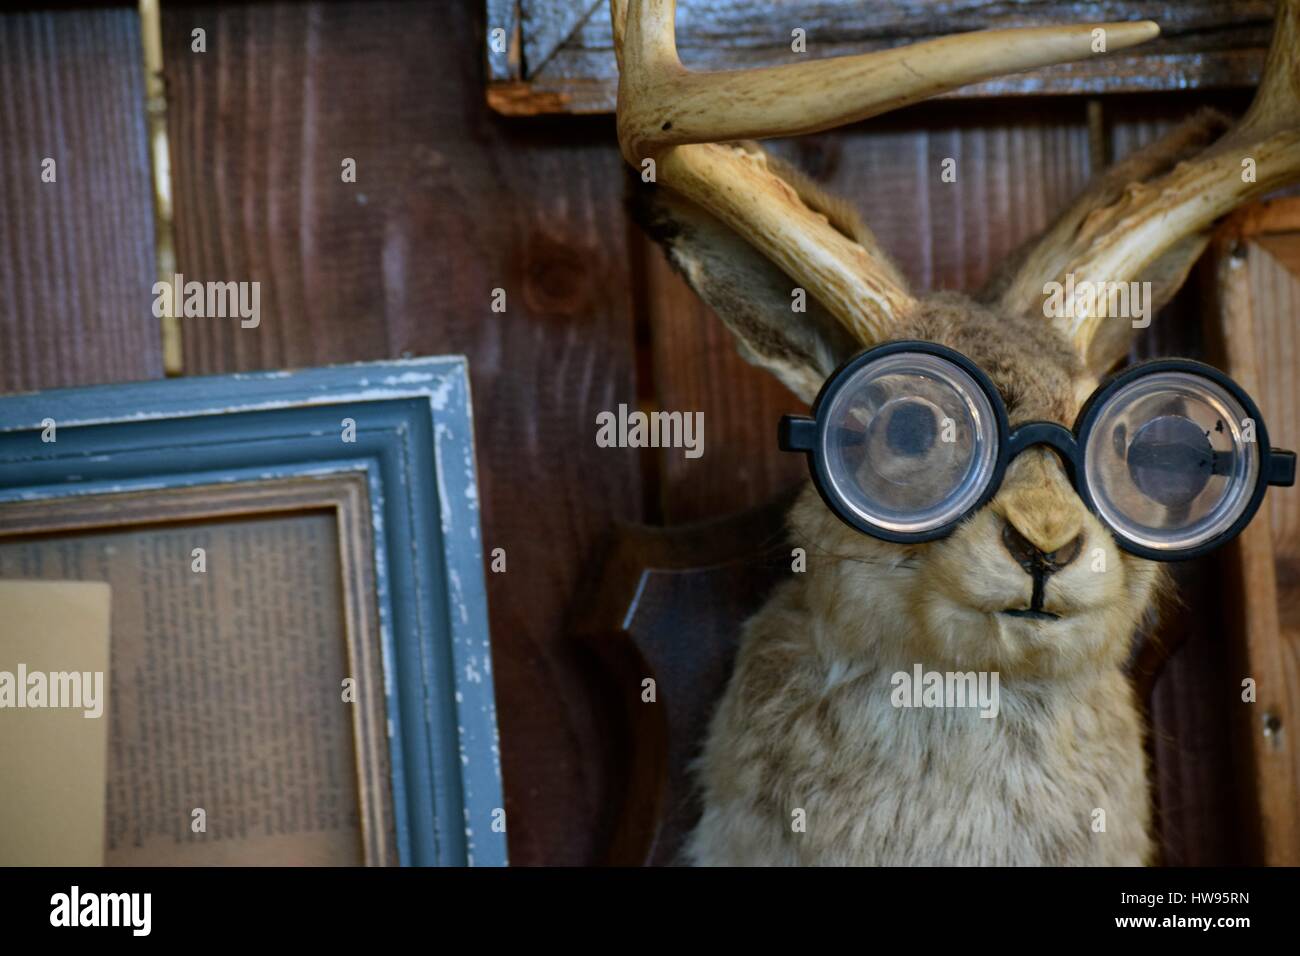 Stuffed Jackalope / Mythical creature found in a restaurant, this eclectic stuffed jackalope with glasses brings amusement. Stock Photo